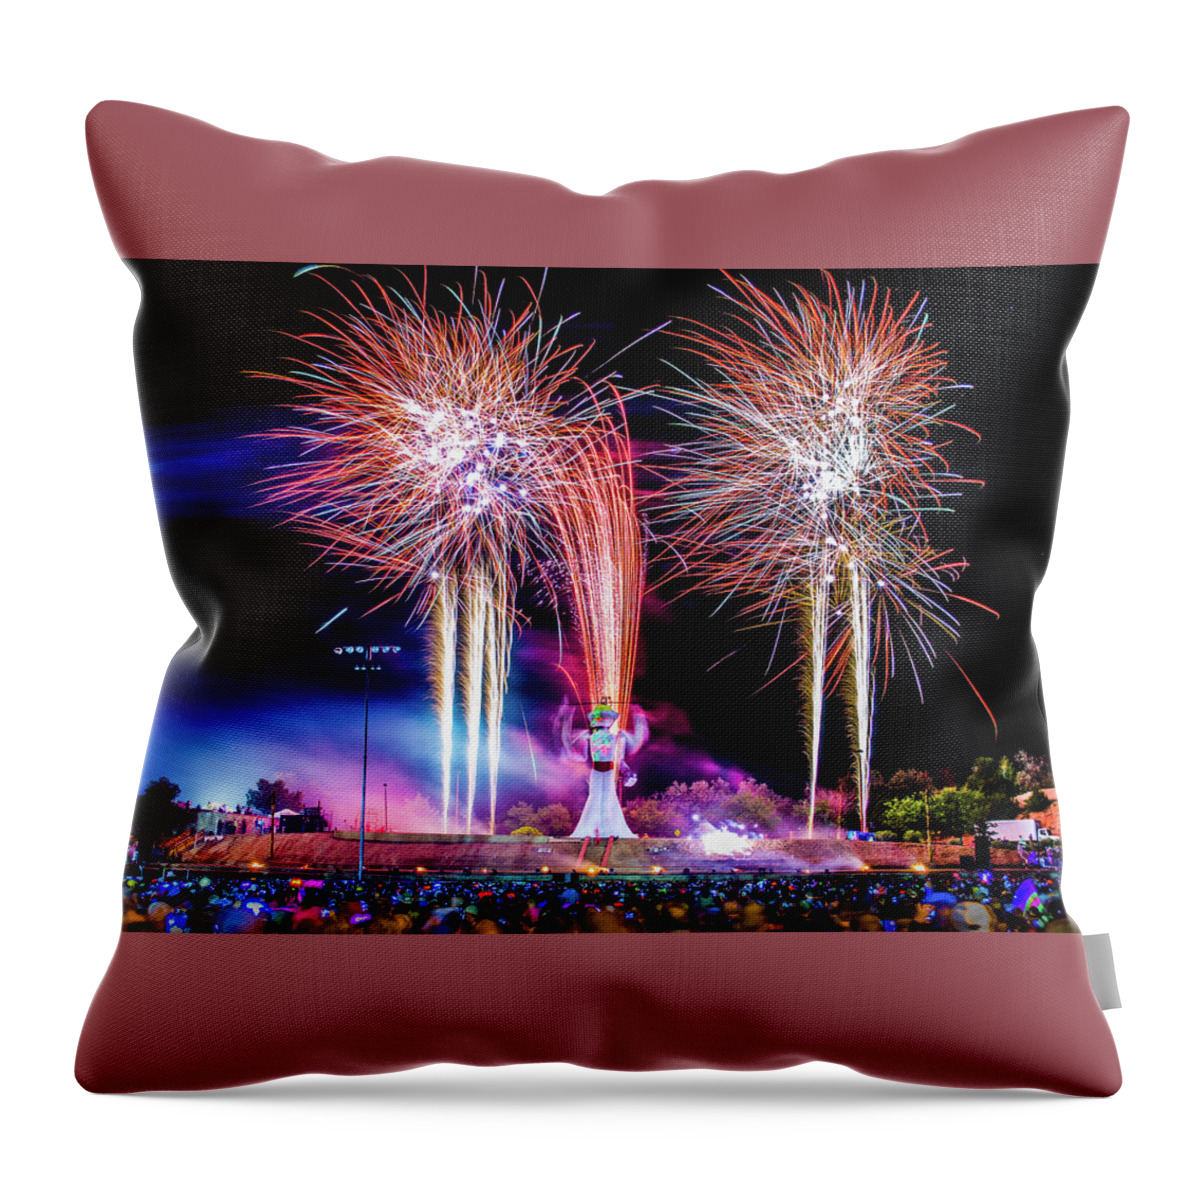 Burn Throw Pillow featuring the photograph Zozobra Must Burn by Paul LeSage